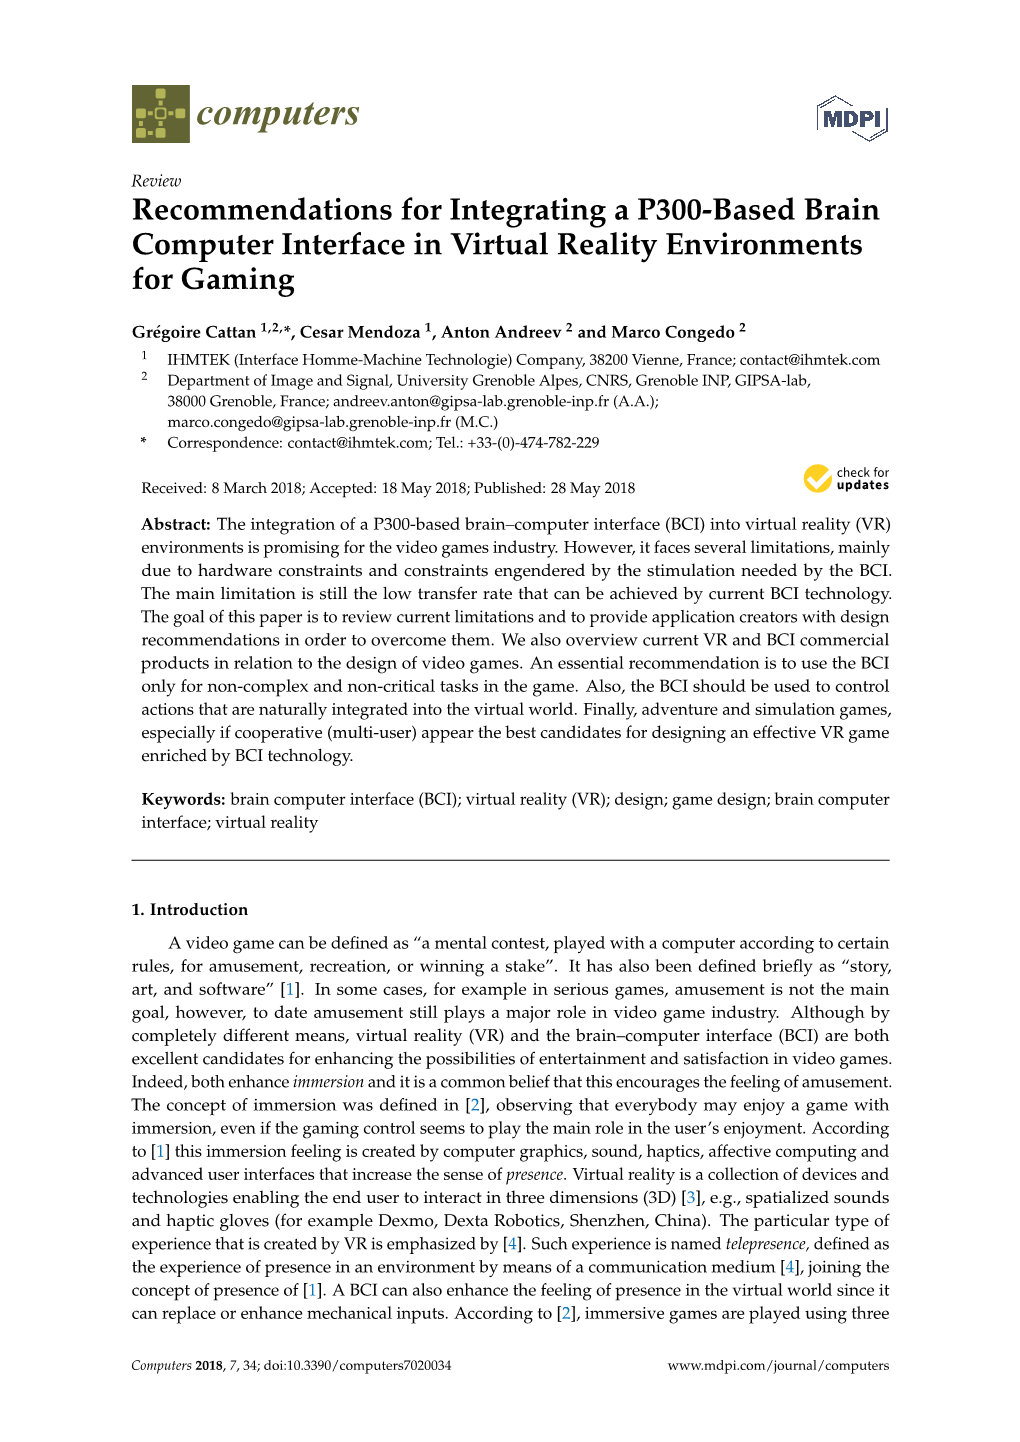 Recommendations for Integrating a P300-Based Brain Computer Interface in Virtual Reality Environments for Gaming